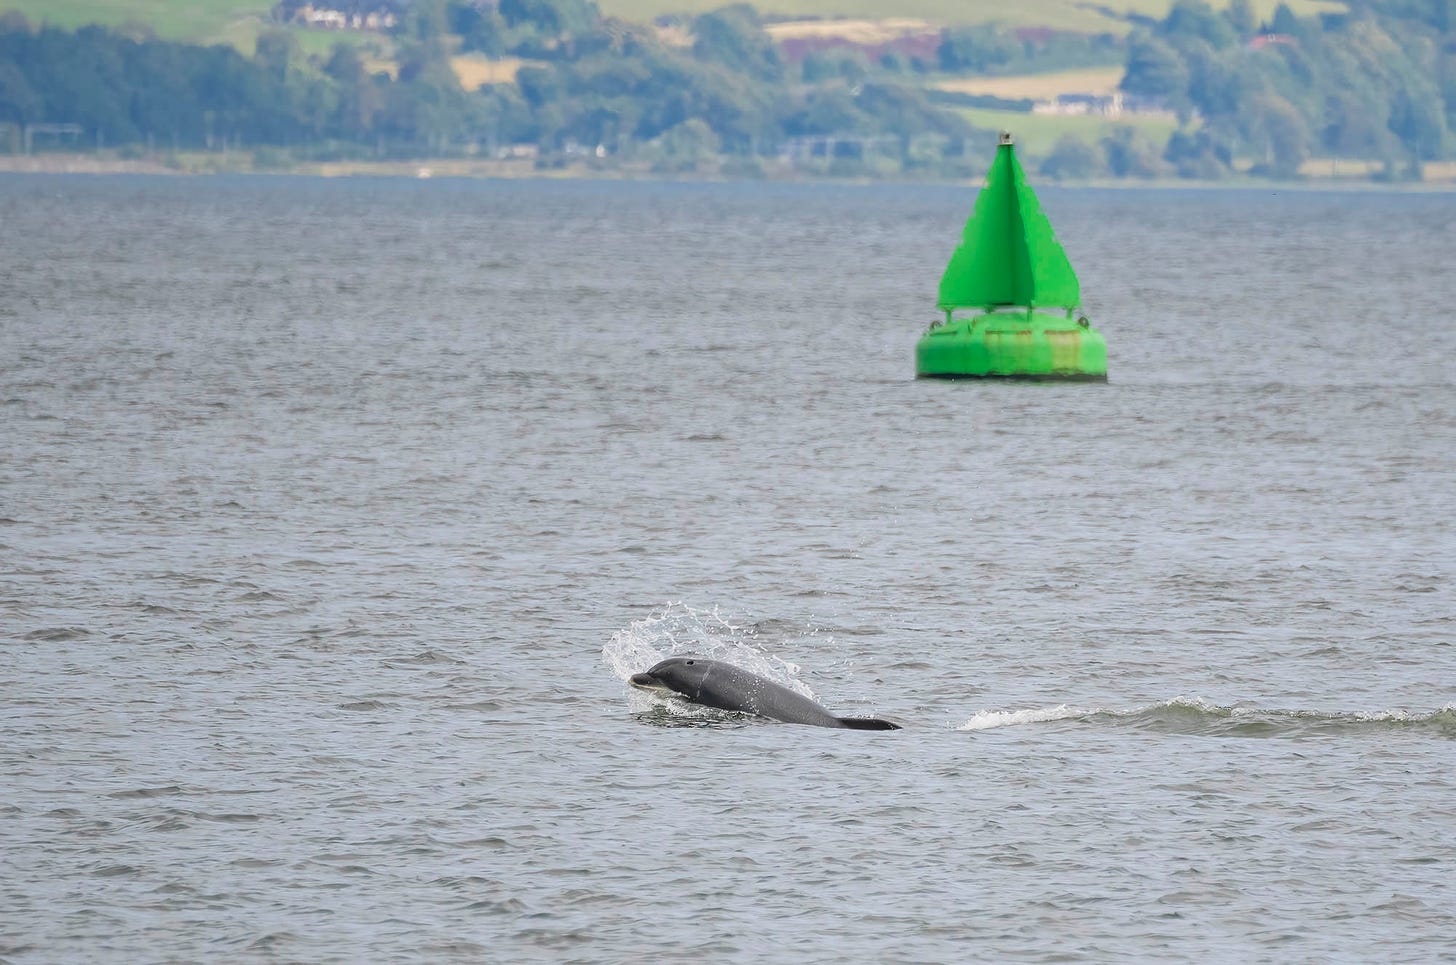 Photo of the head of a bottlenose dolphin breaking the surface of the water with a buoy in the background